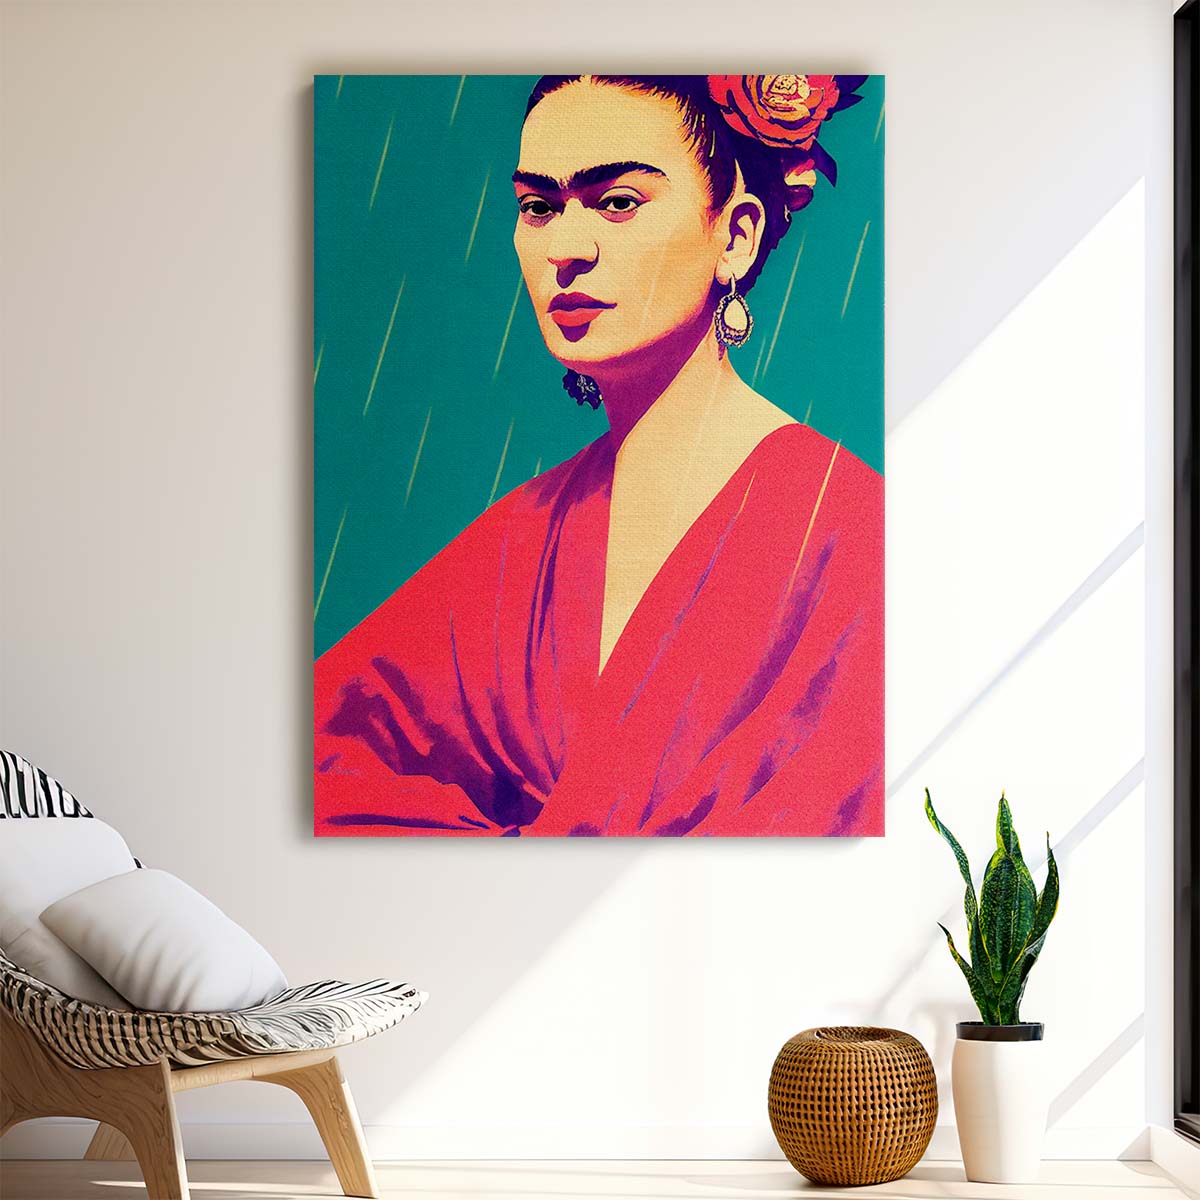 Frida Kahlo Colorful Floral Portrait Illustration by Treechild by Luxuriance Designs, made in USA